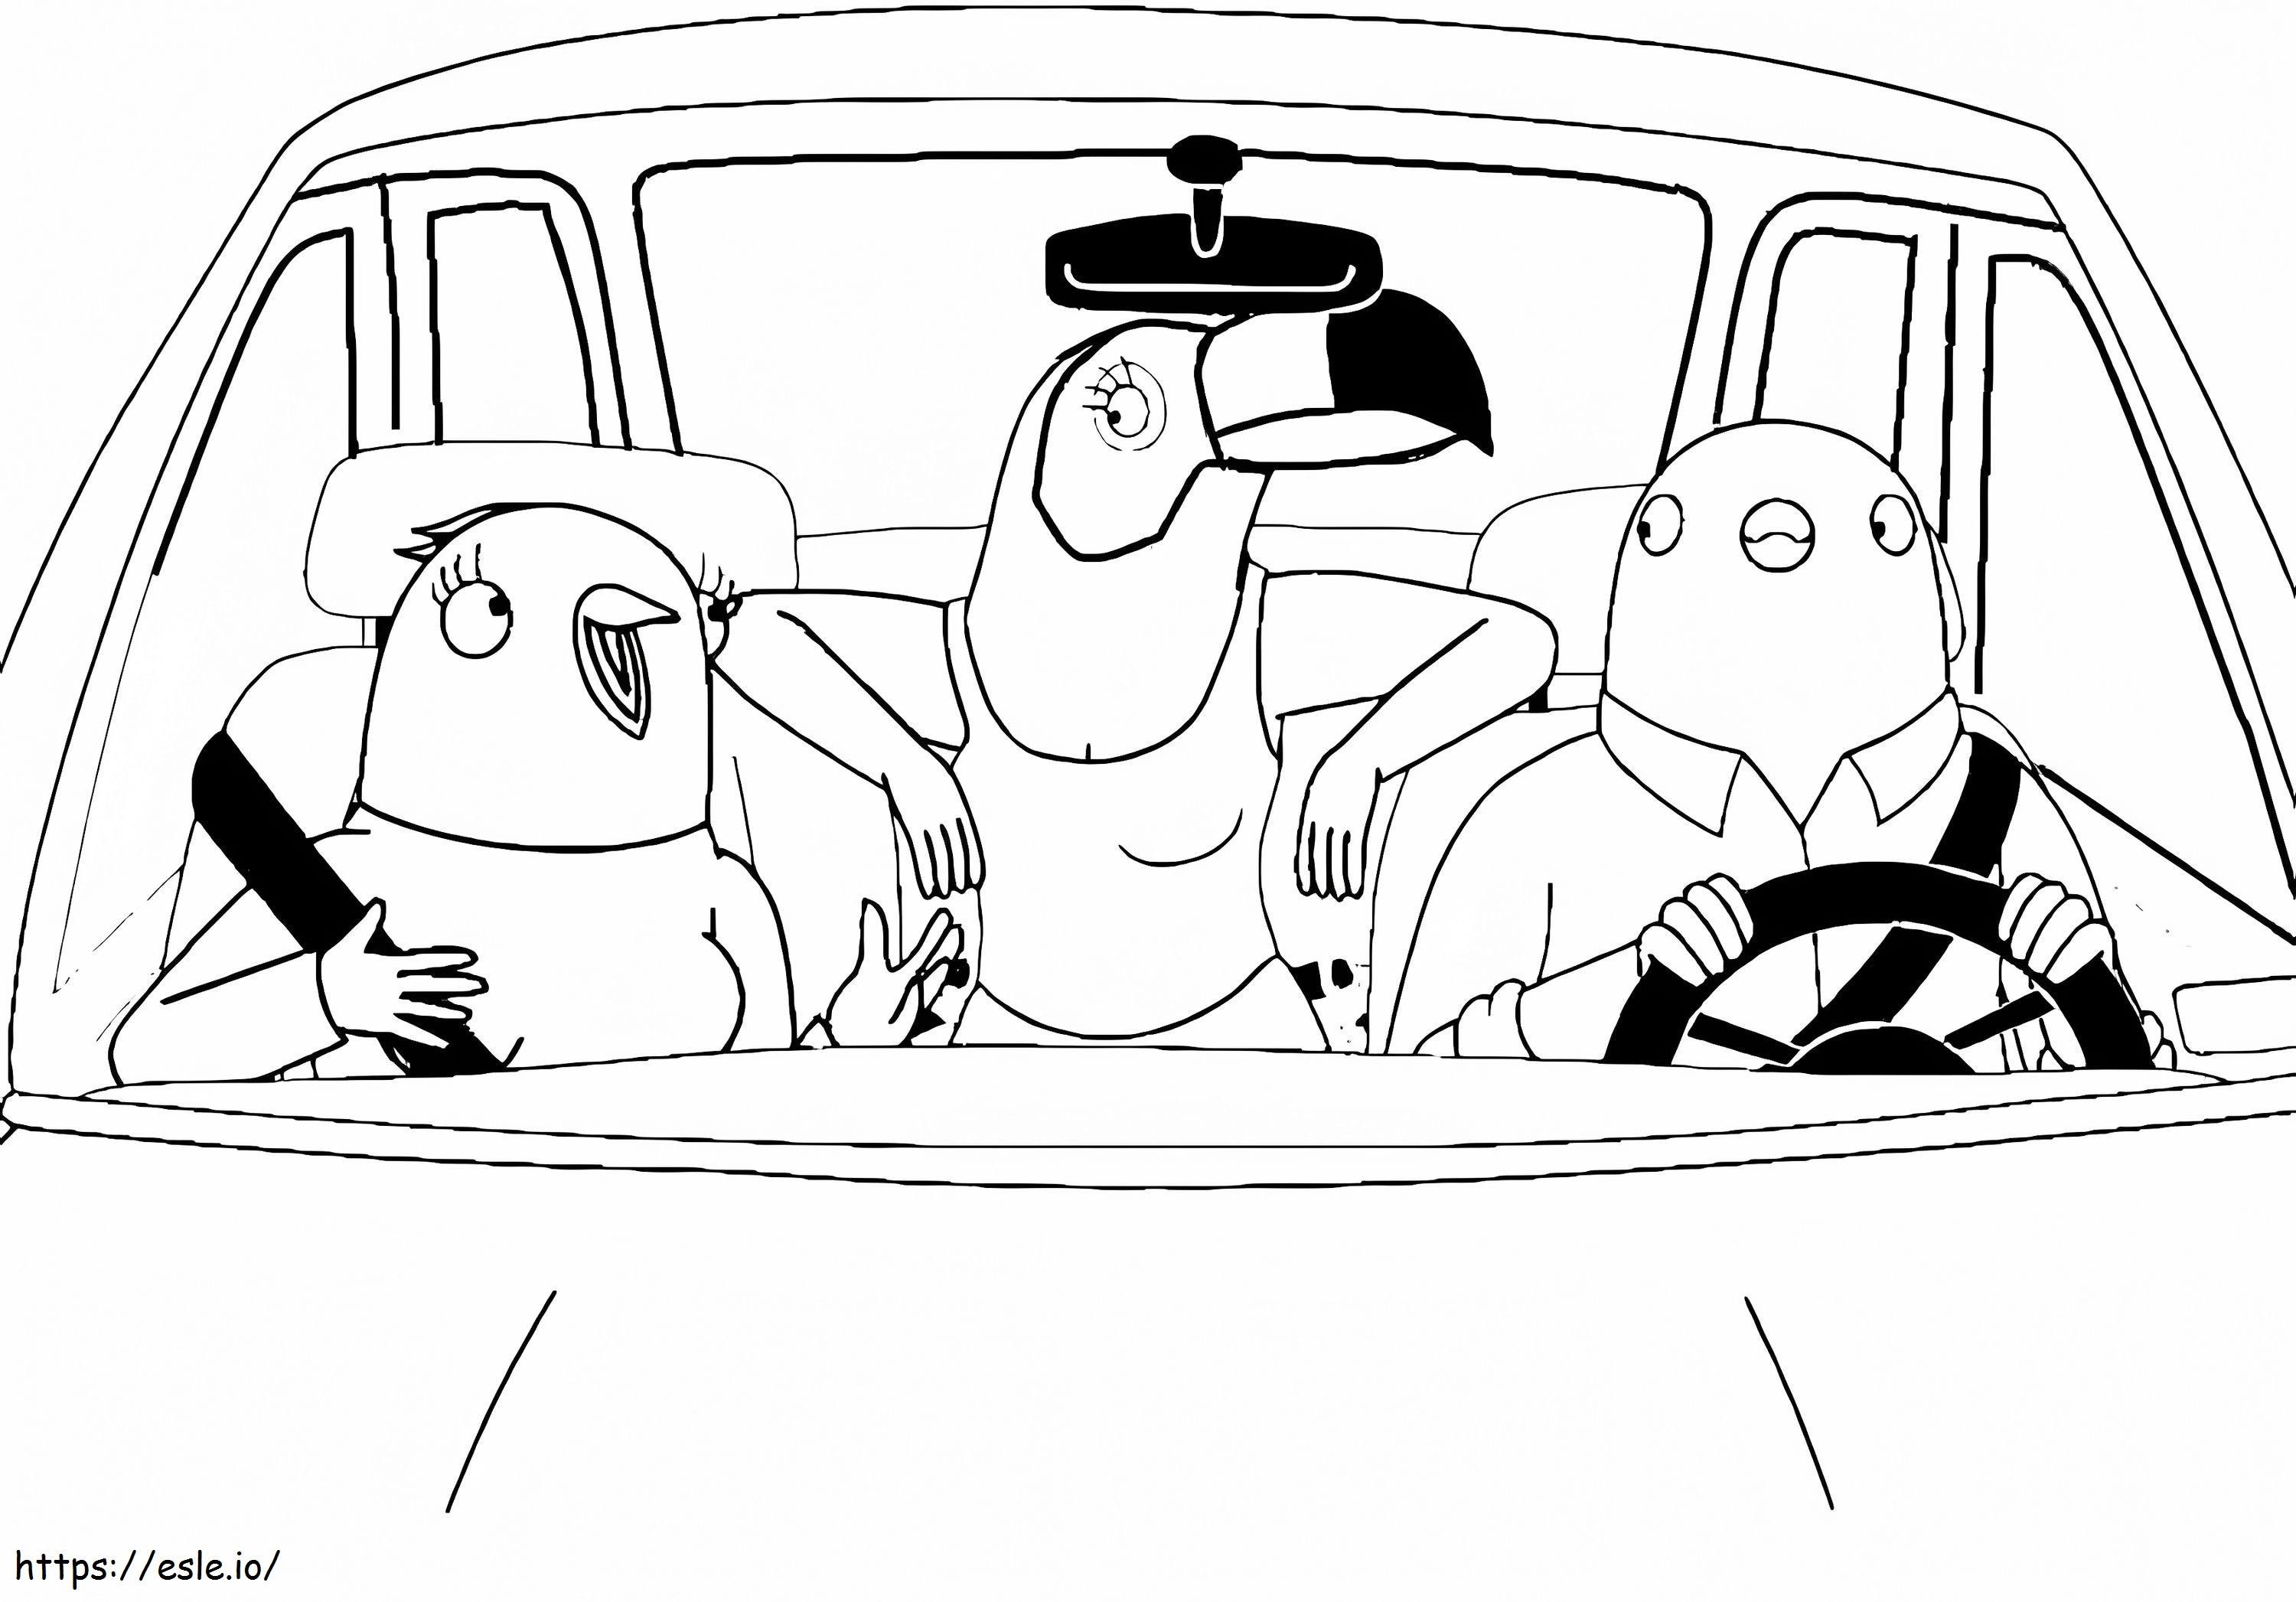 Speckle With Tuca And Bertie coloring page